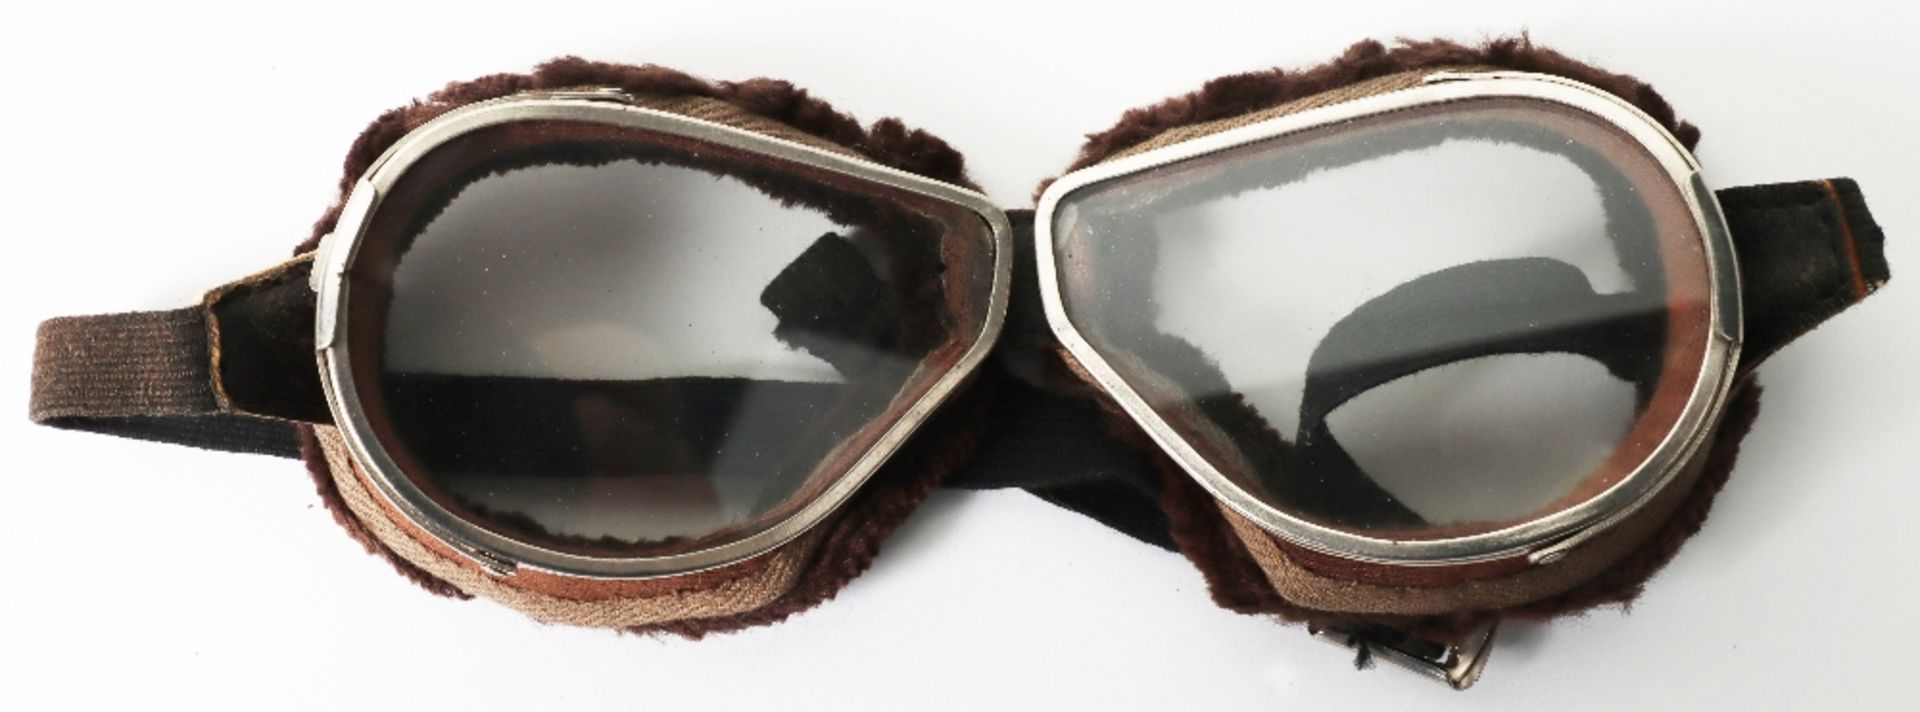 Five Pairs of Aviators Flying Goggles - Image 3 of 7